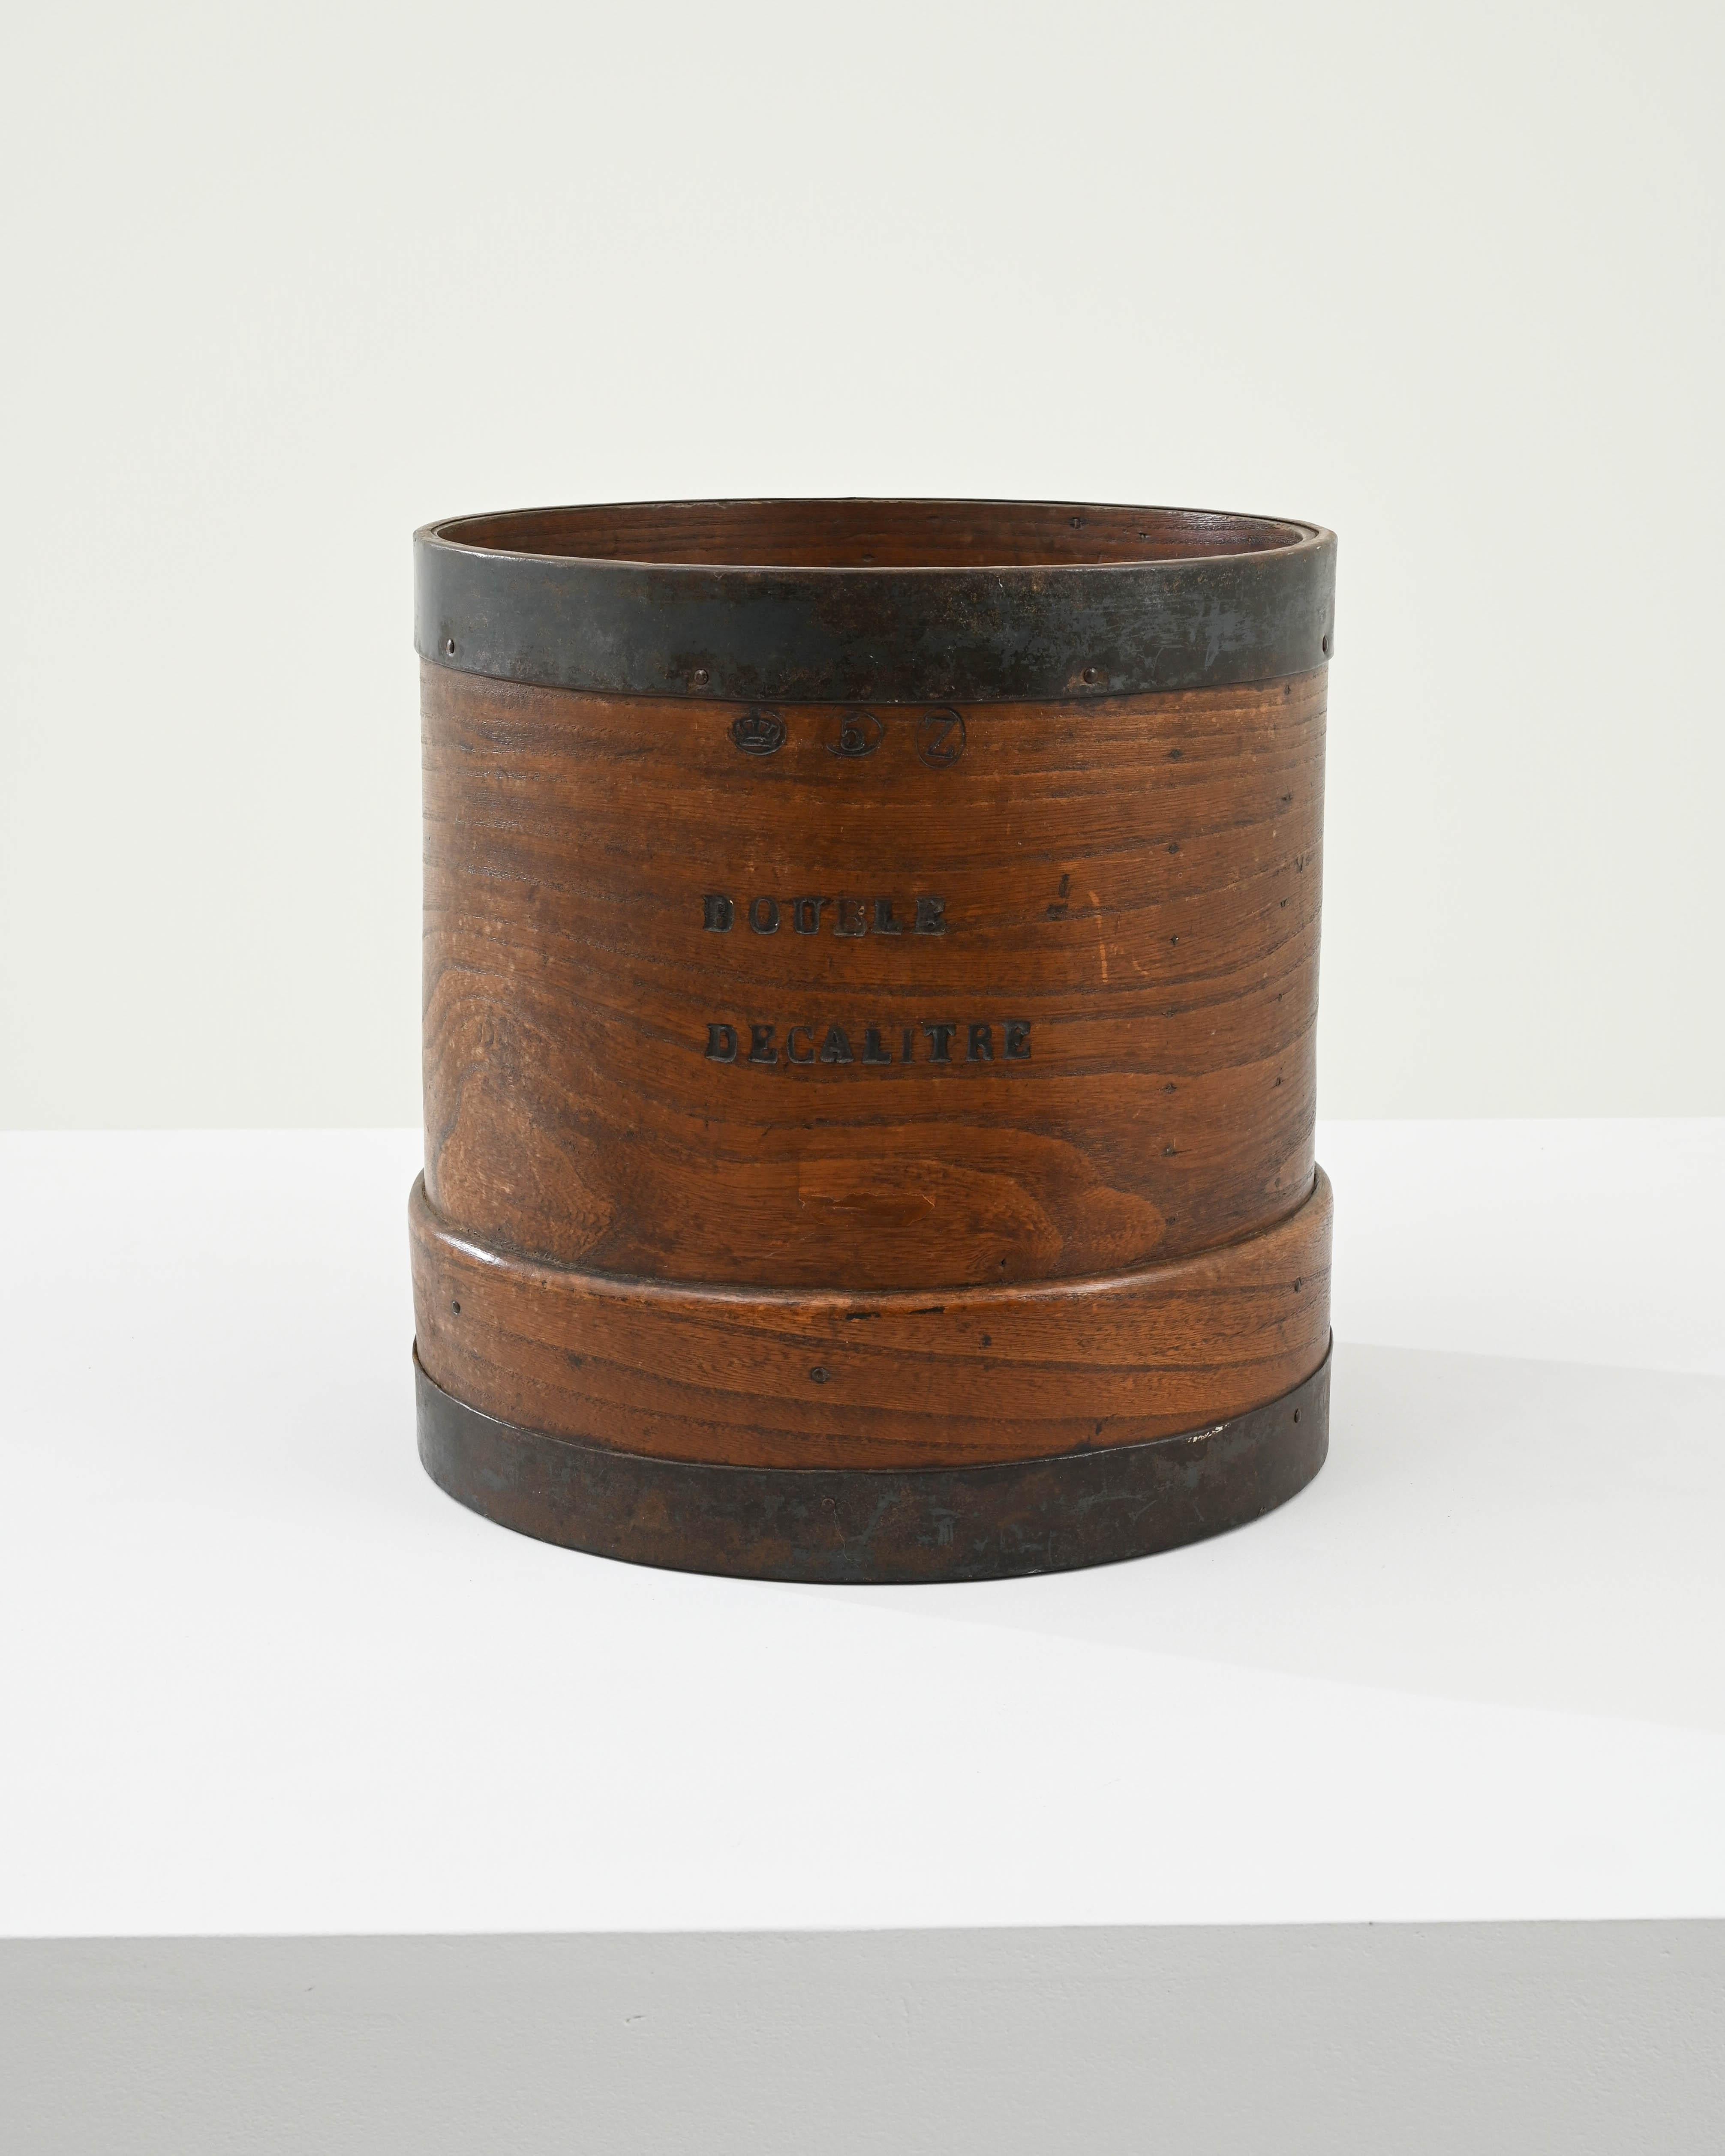 A wooden and metal bucket originating in France, circa 1900. Originally used for measuring out volumetric units of dry goods in stores or markets, stamped and approved with certainty, ‘double decalitre’ as indicated, faithfully measures 20 liters